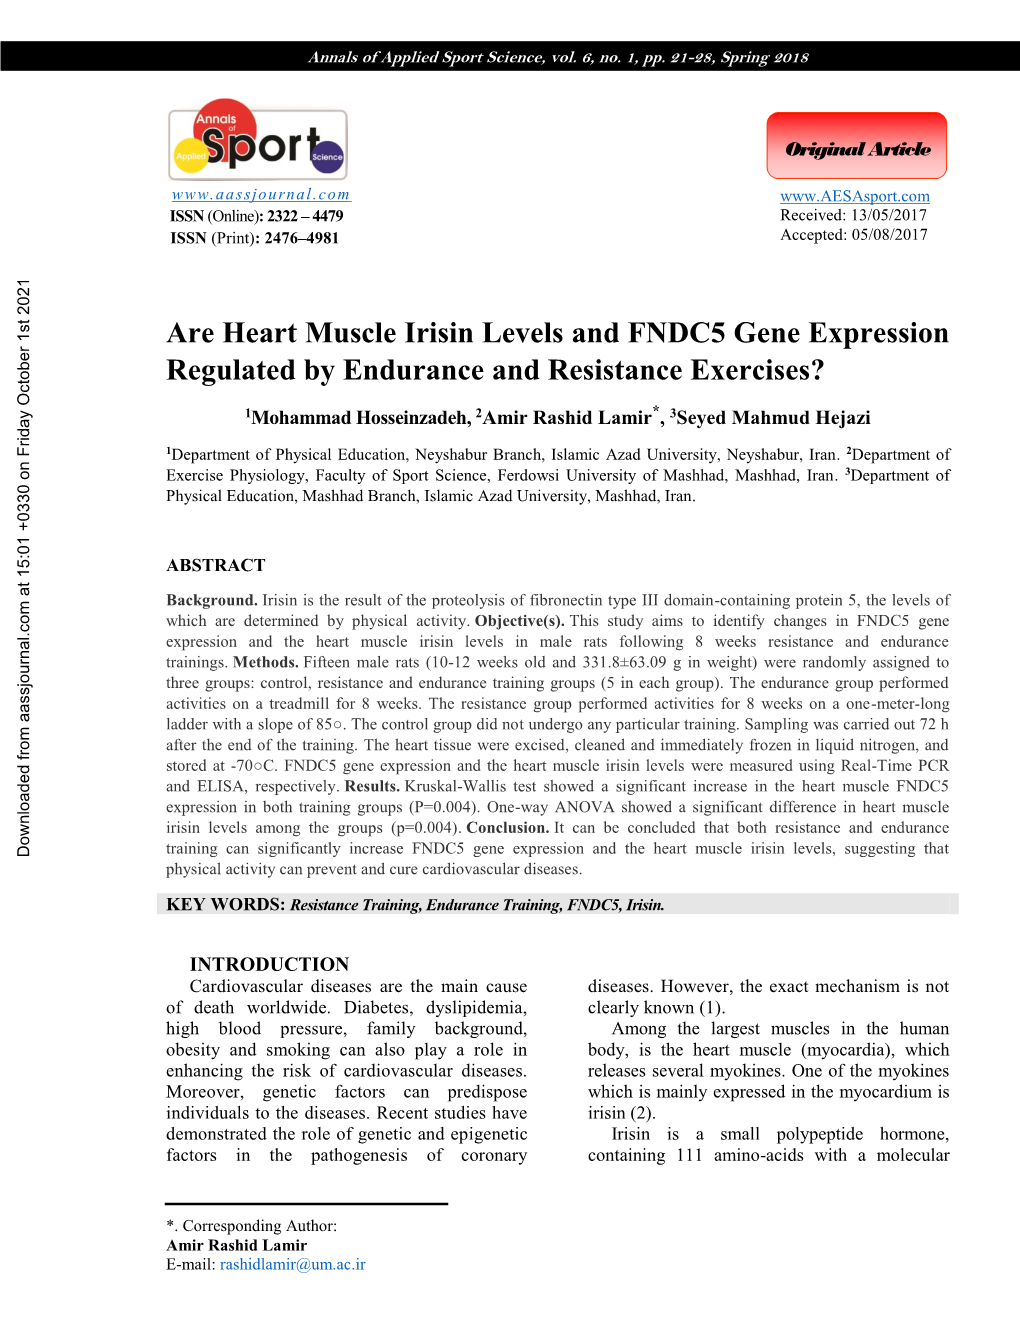 Are Heart Muscle Irisin Levels and FNDC5 Gene Expression Regulated by Endurance and Resistance Exercises?